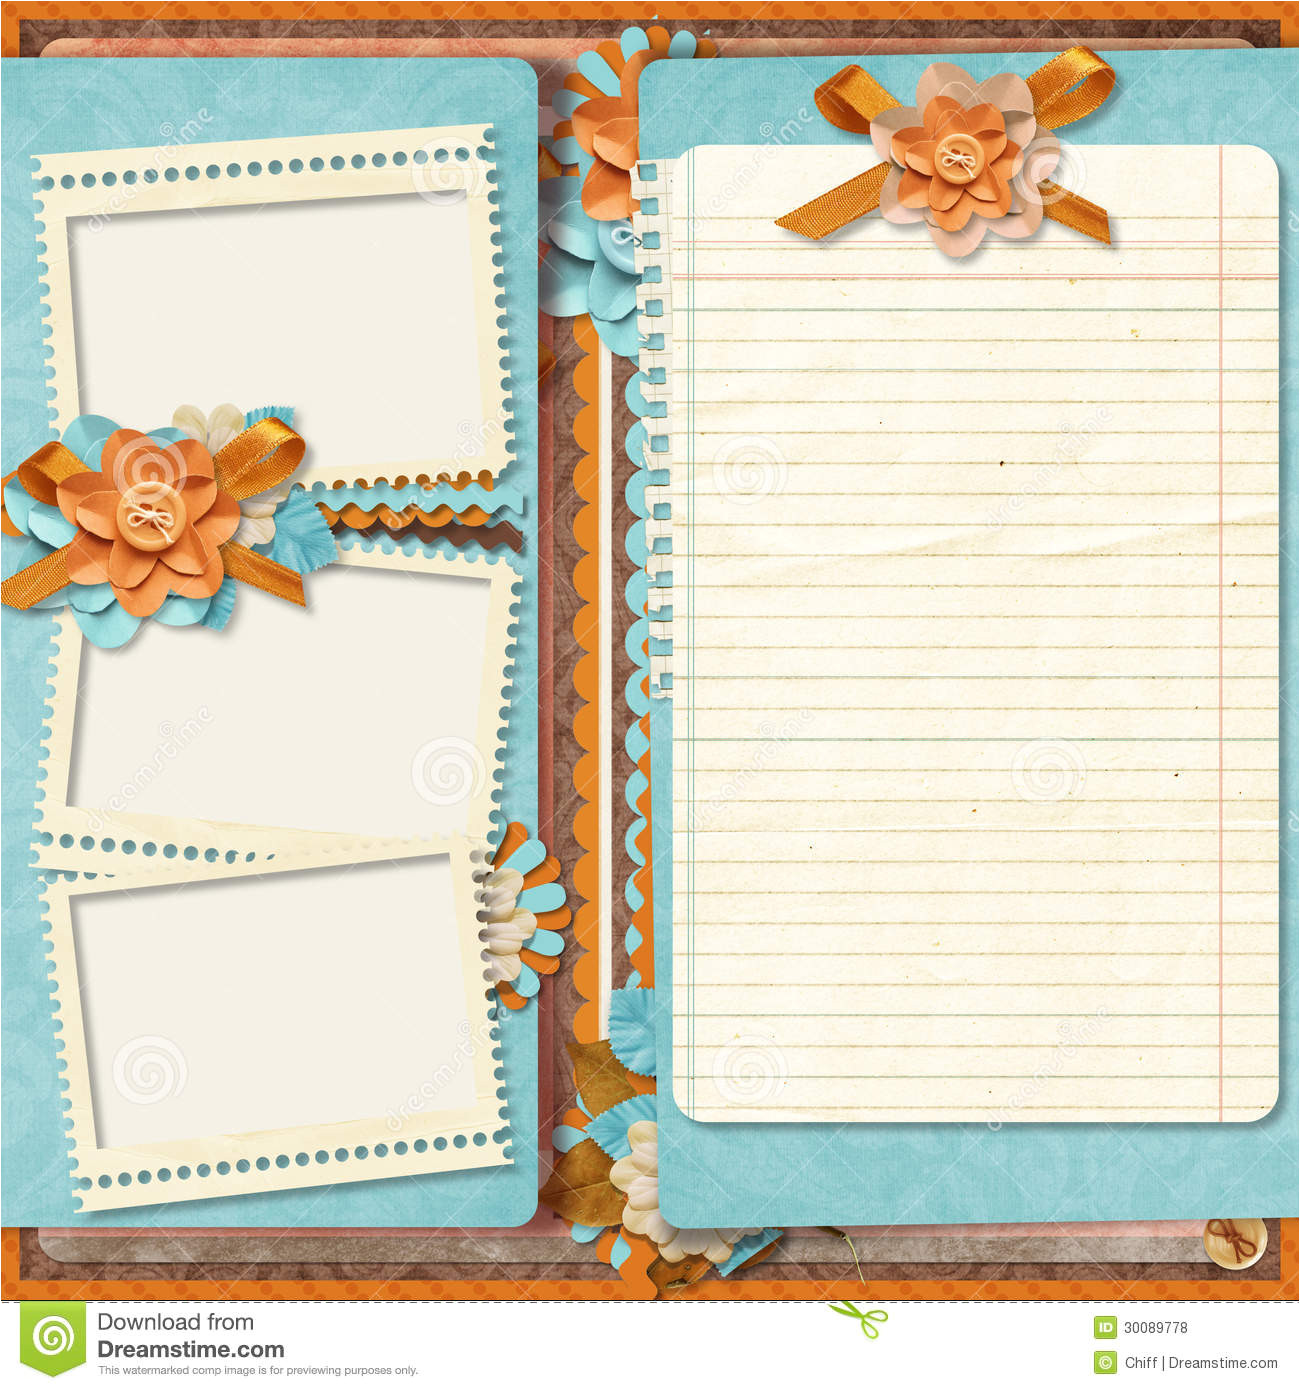 Templates for Scrapbooking to Print 16 Design Digital Scrapbook Templates Images Digital